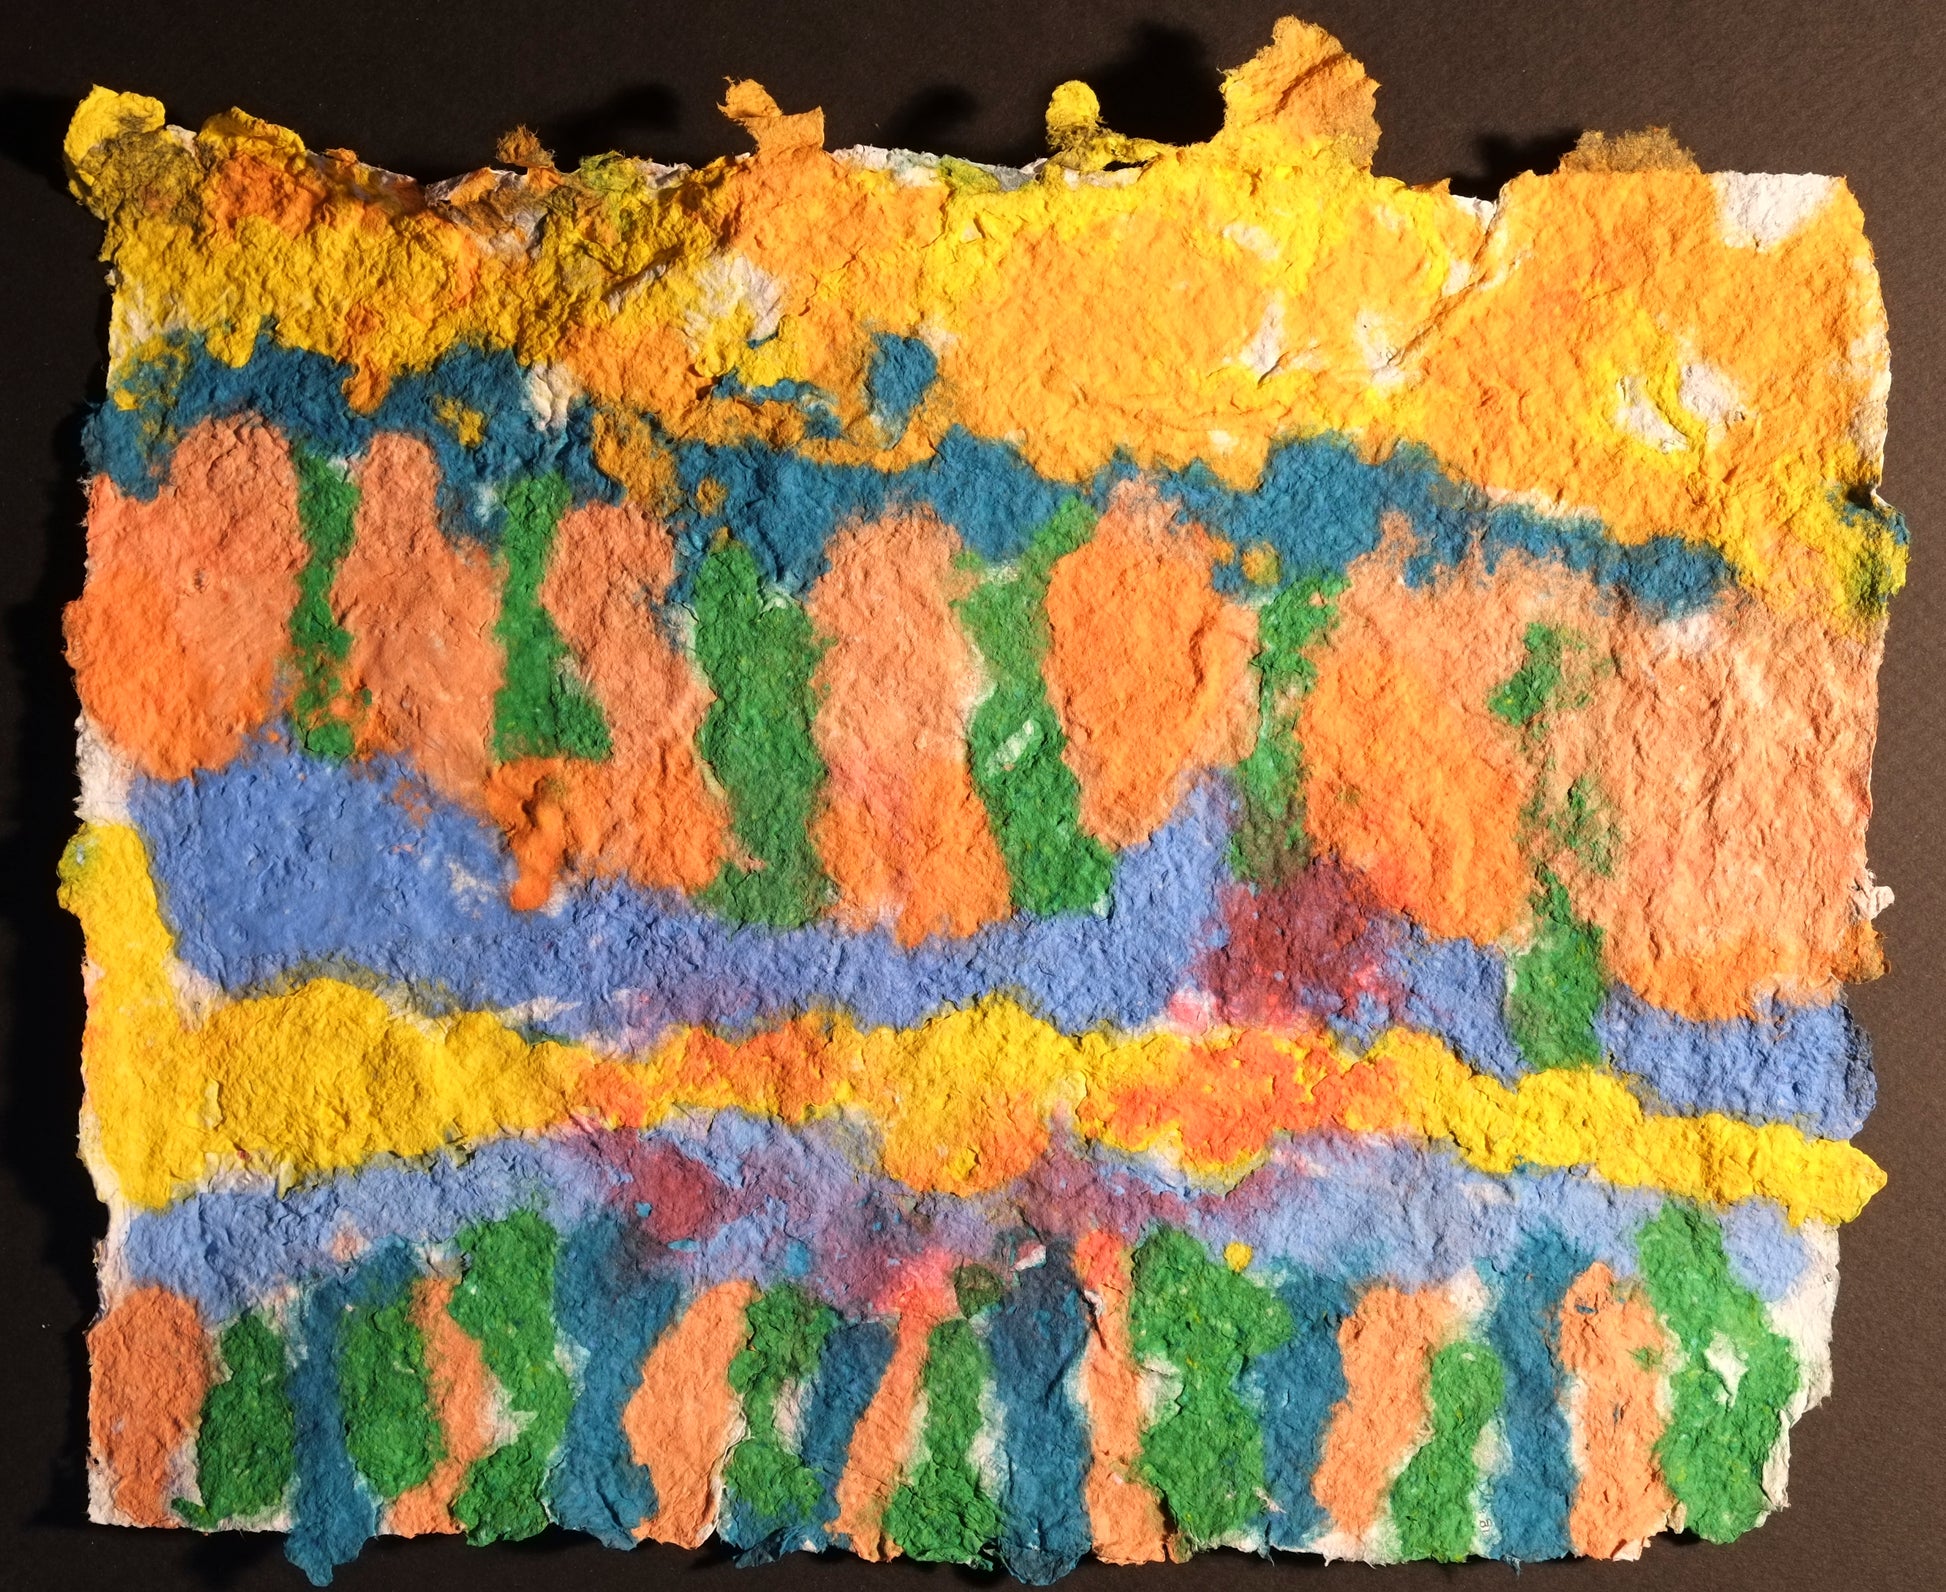 Highly textured handmade paper with horizontal lines of turquoise, light blue and yellow. There are green and turquoise vertical lines in between the horizontal lines amongst an orange and yellow background